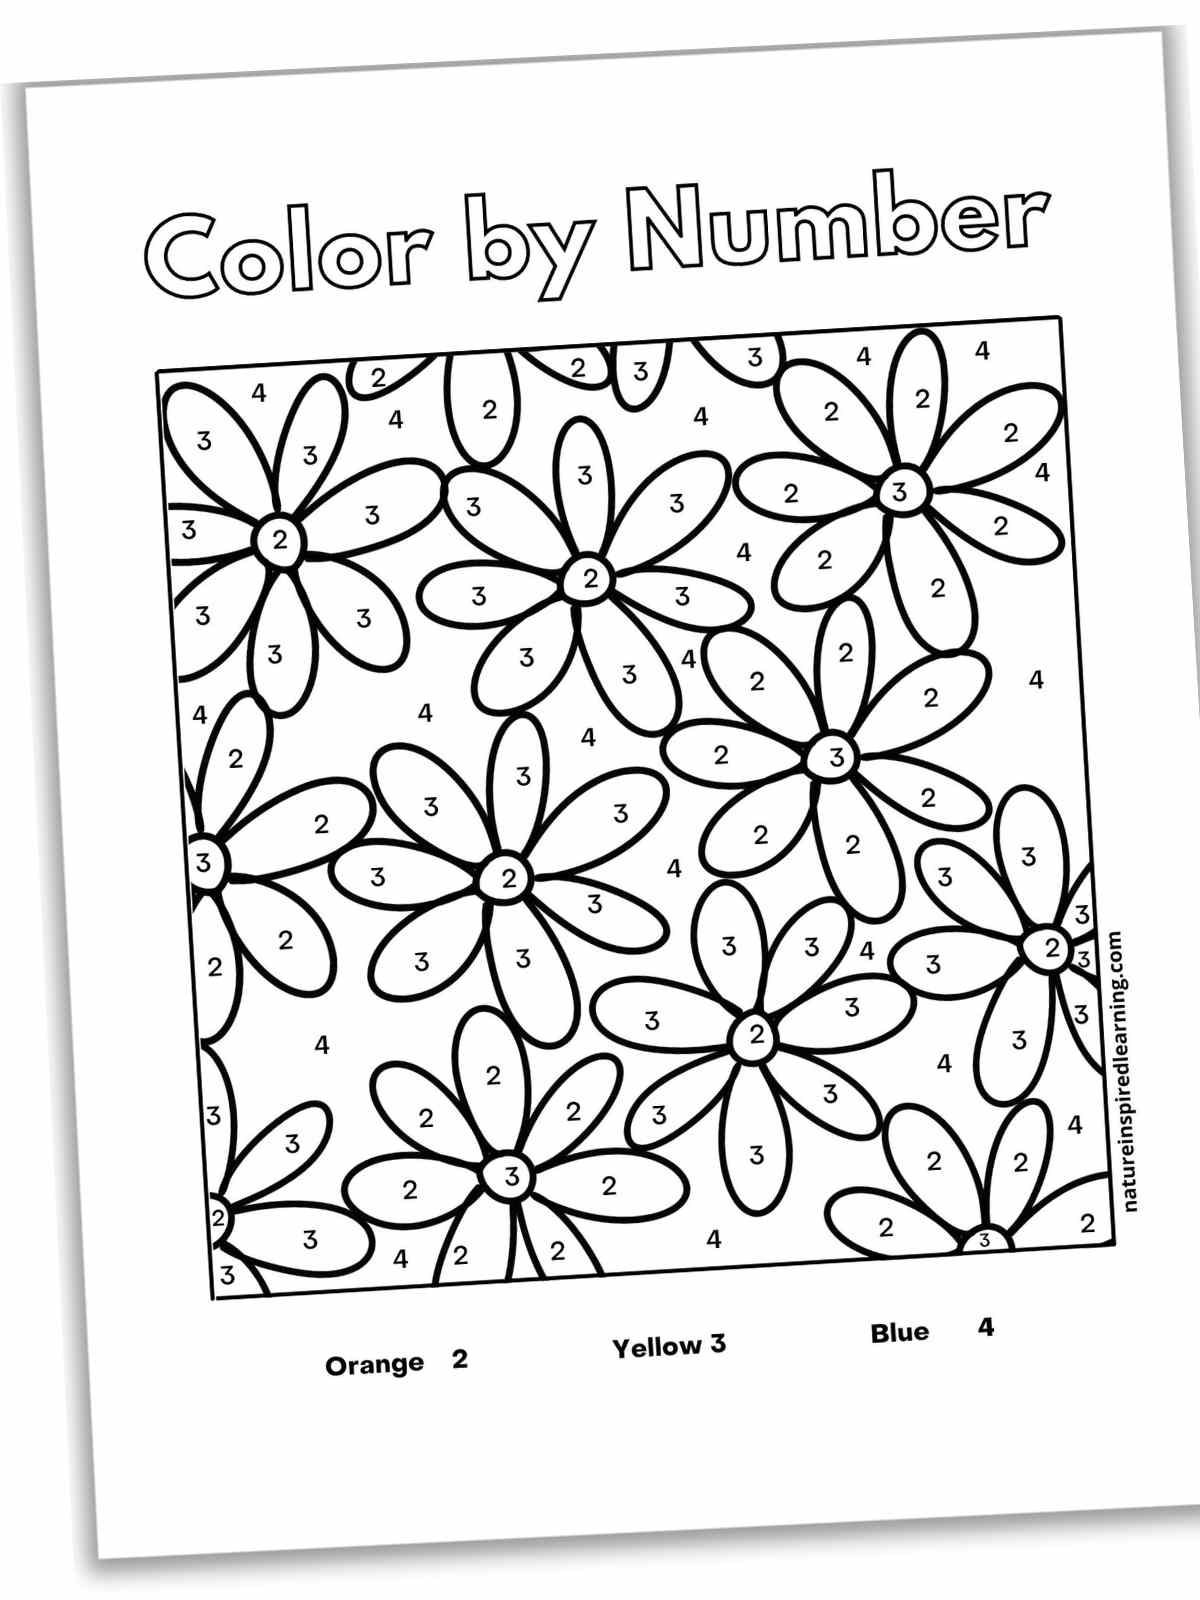 black and white sheet with many small daisies with numbers inside the centers and petals